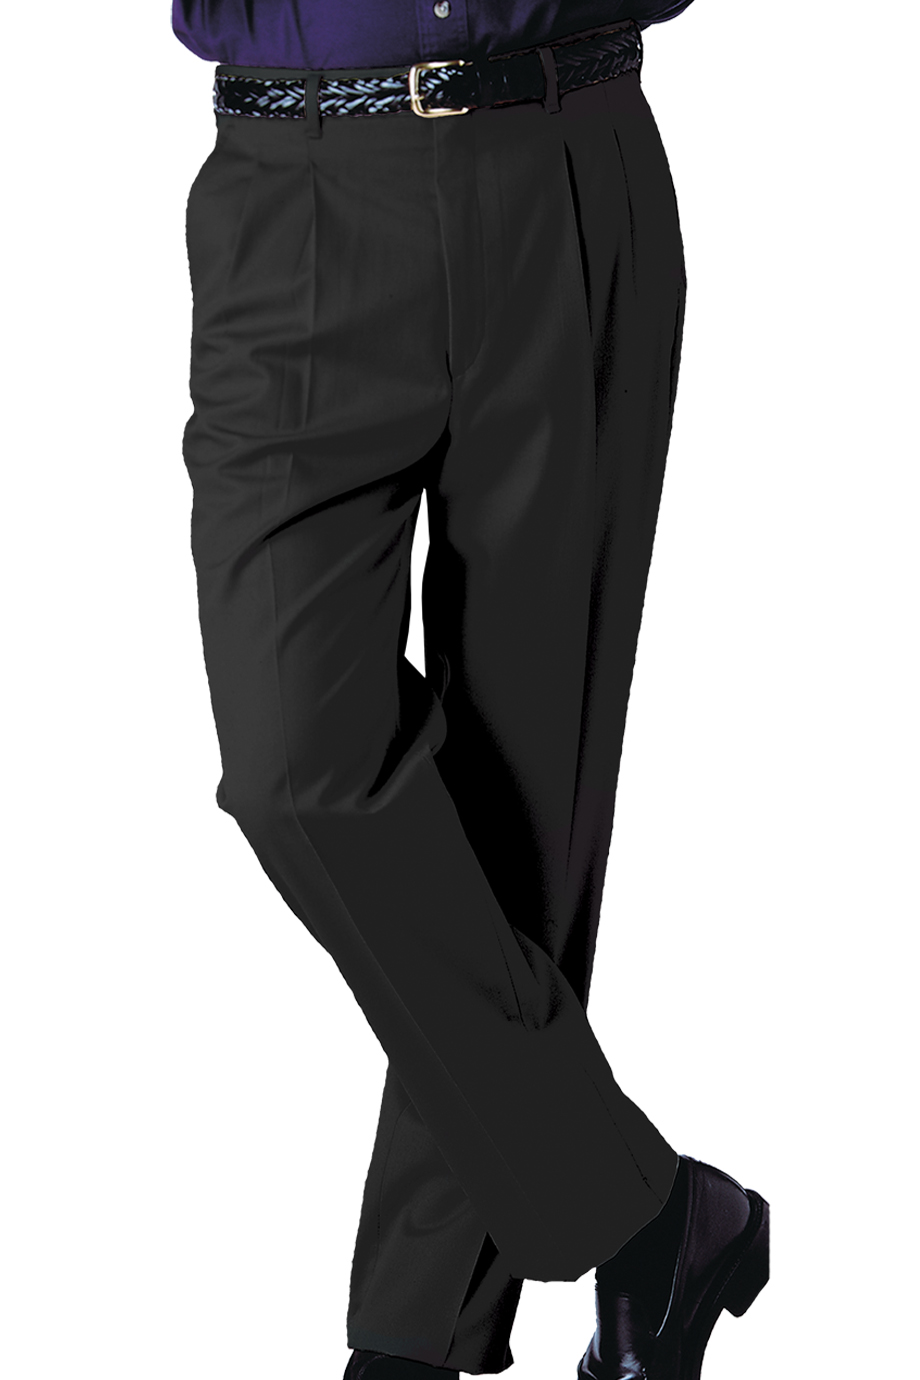 Edwards Men's Big & Tall  Business Casual Pleated Pant